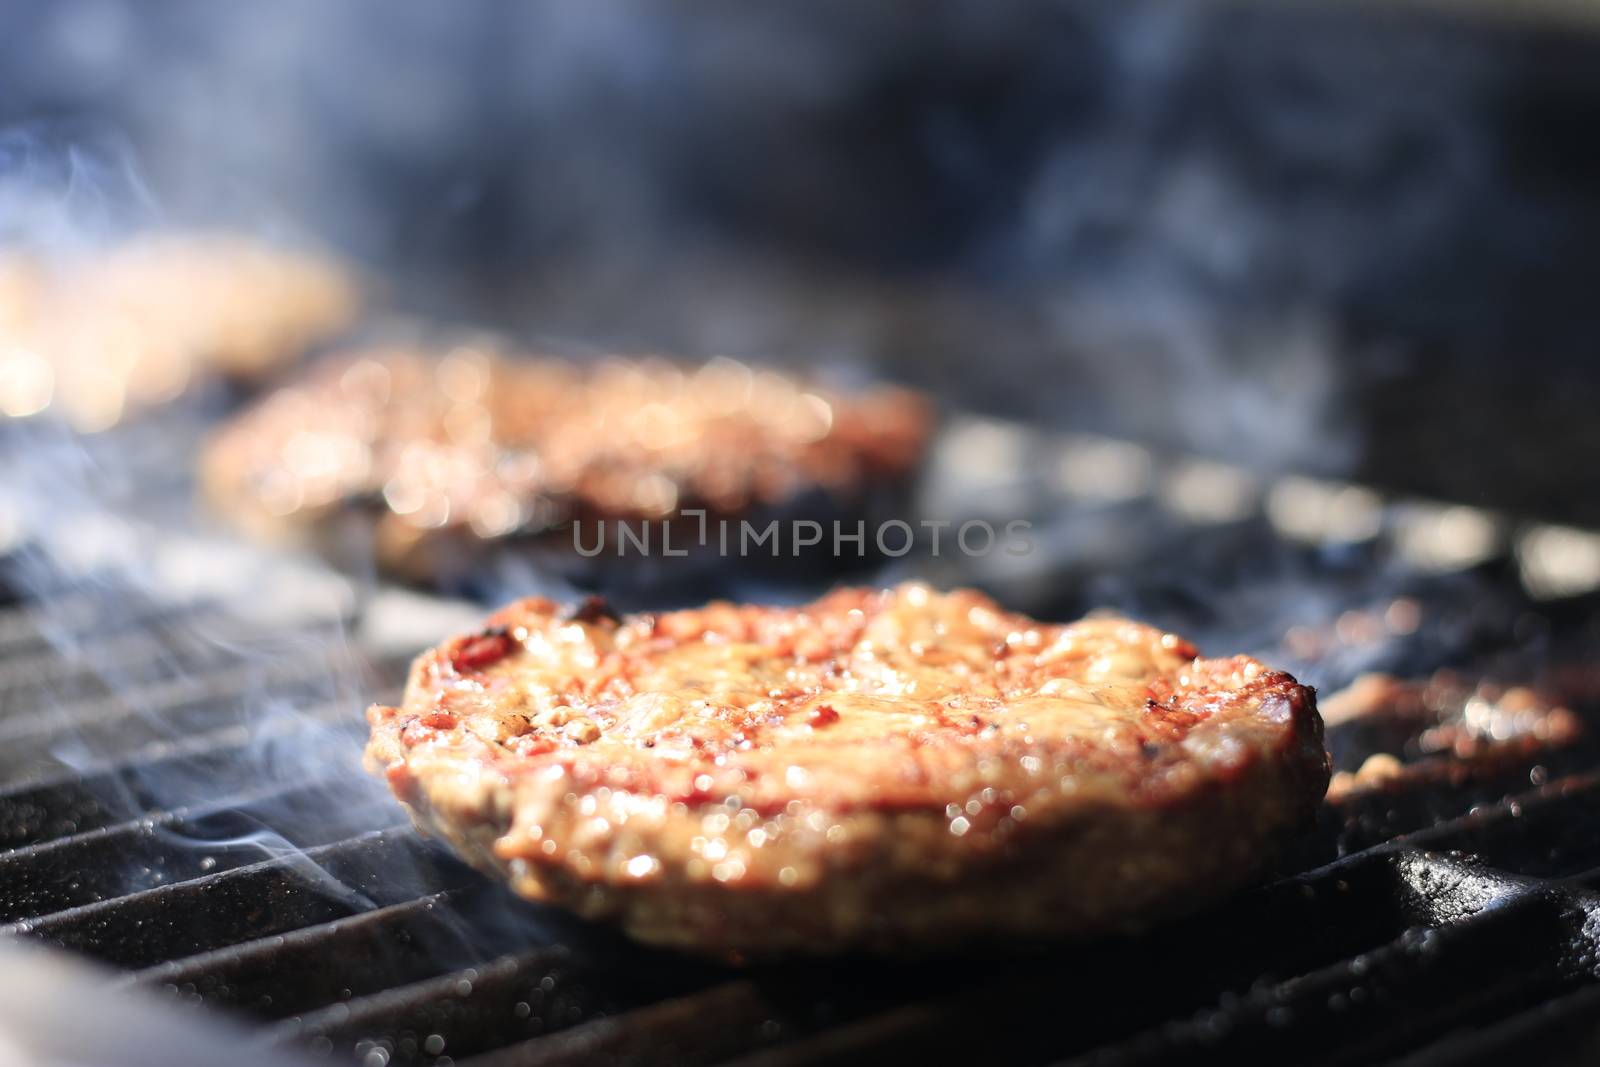 Burgers. Hamburgers being flame broiled on the gas grill